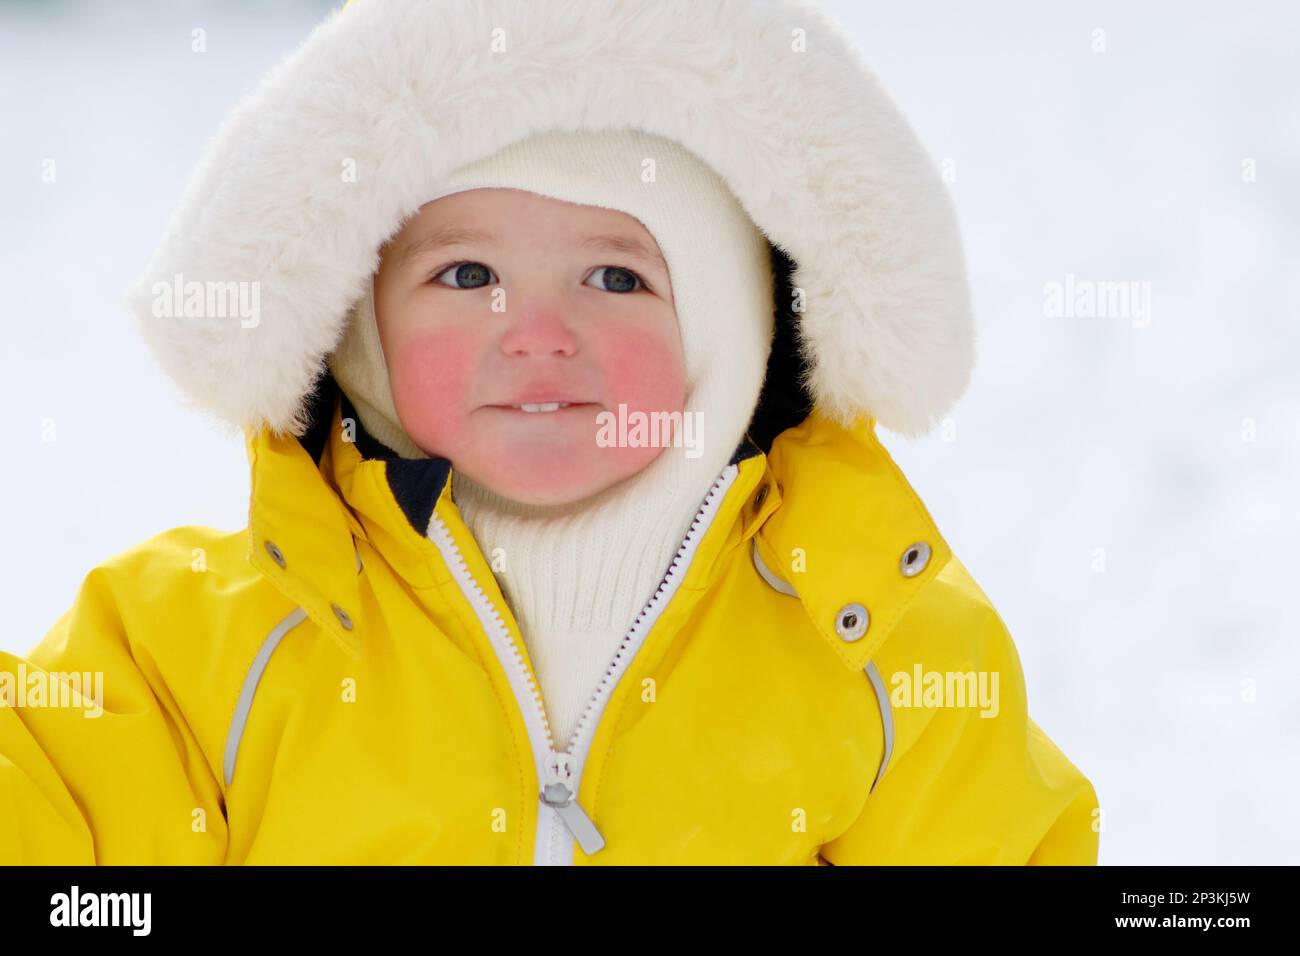 Young boy in warm winter thermal suit clothing outdoor portrait in snow  Model Release: Yes. Property Release: No Stock Photo - Alamy